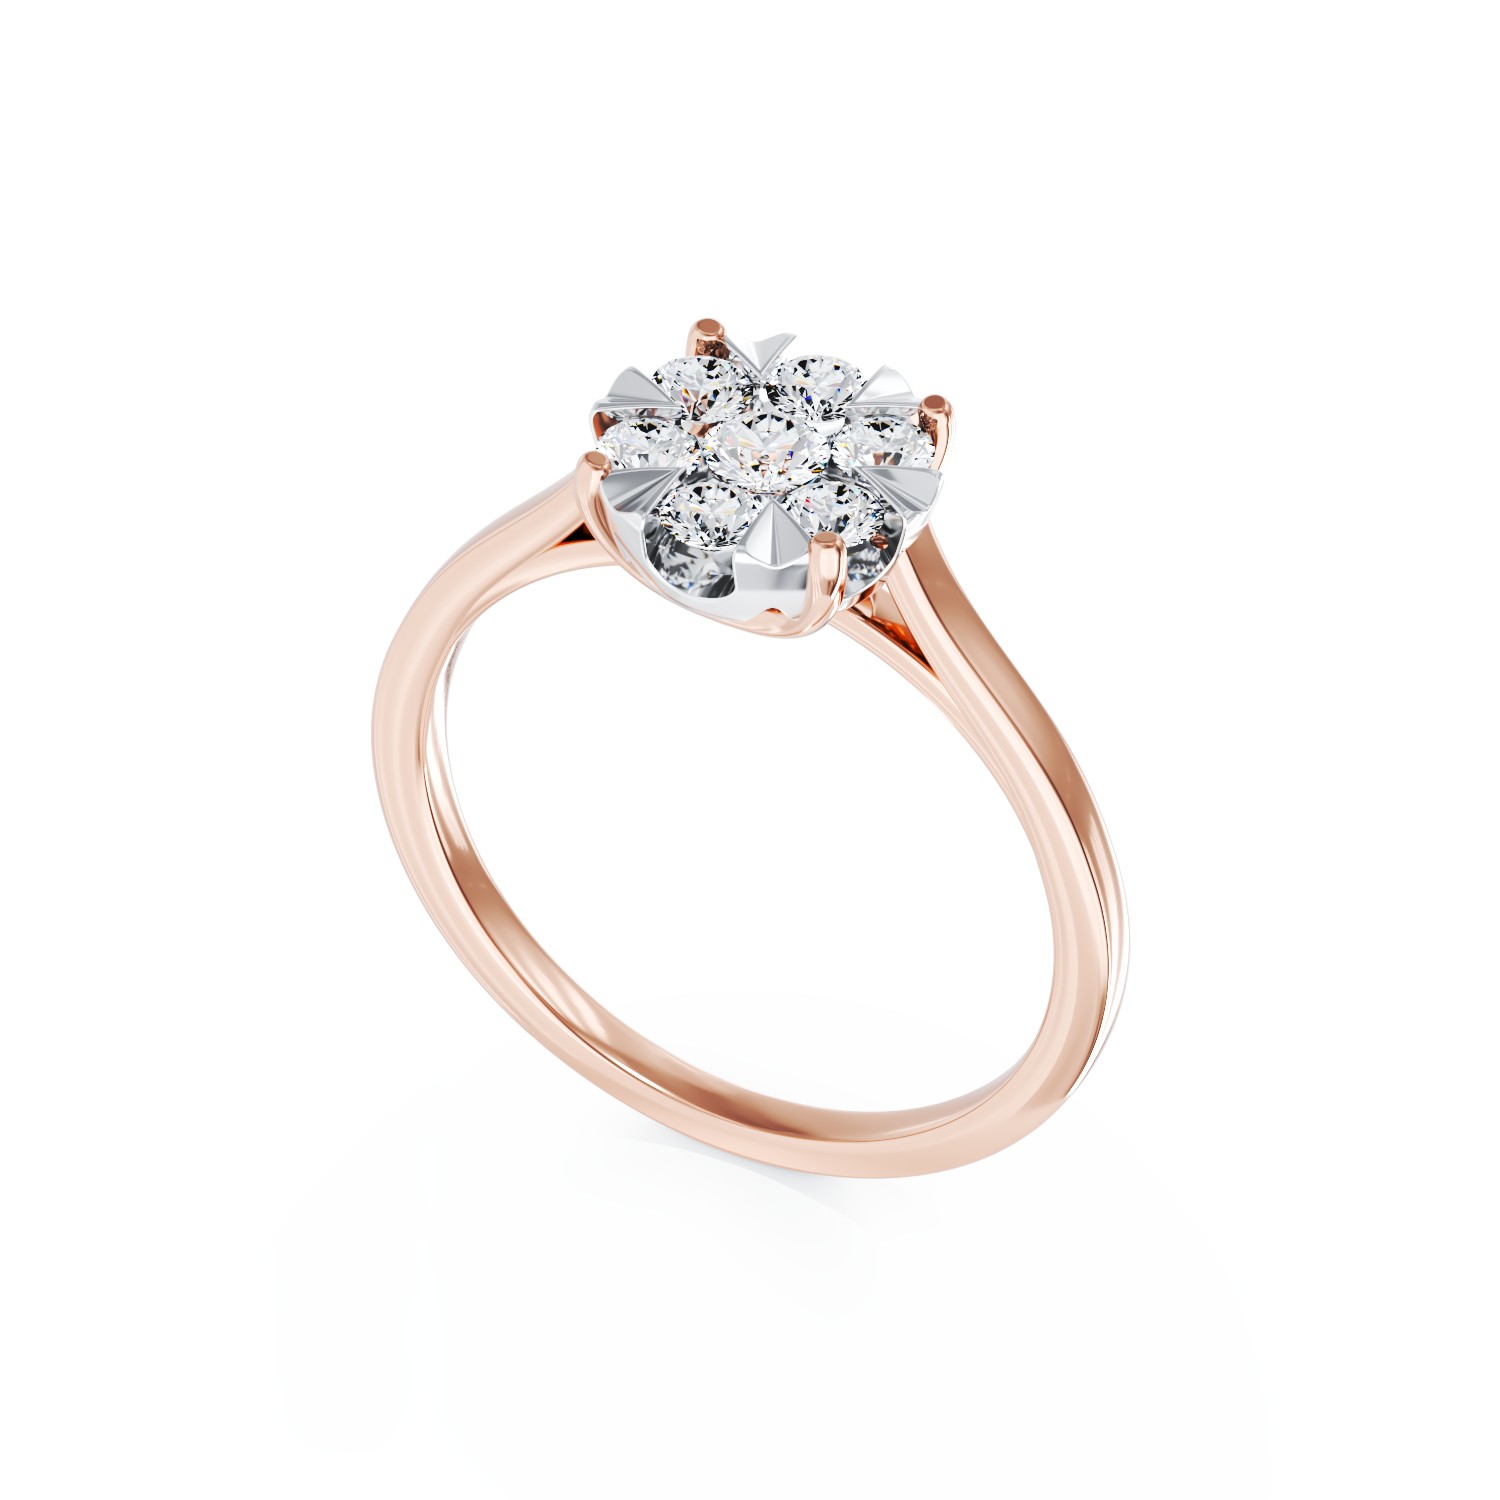 18K rose gold engagement ring with 0.2ct diamonds